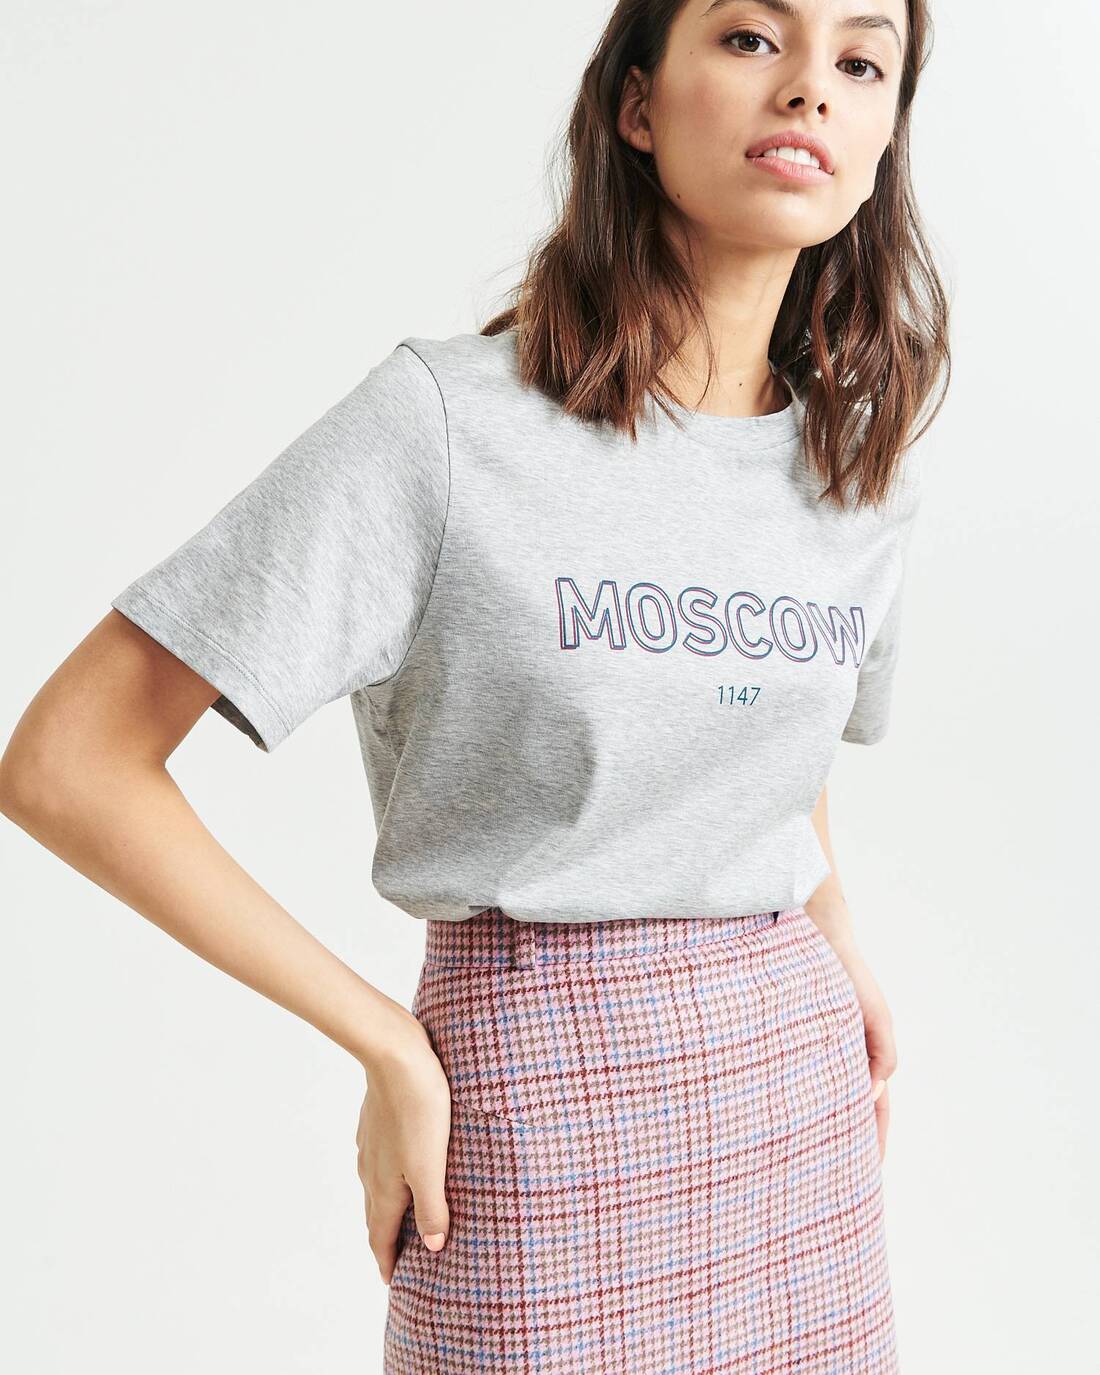 Moscow t-shirt